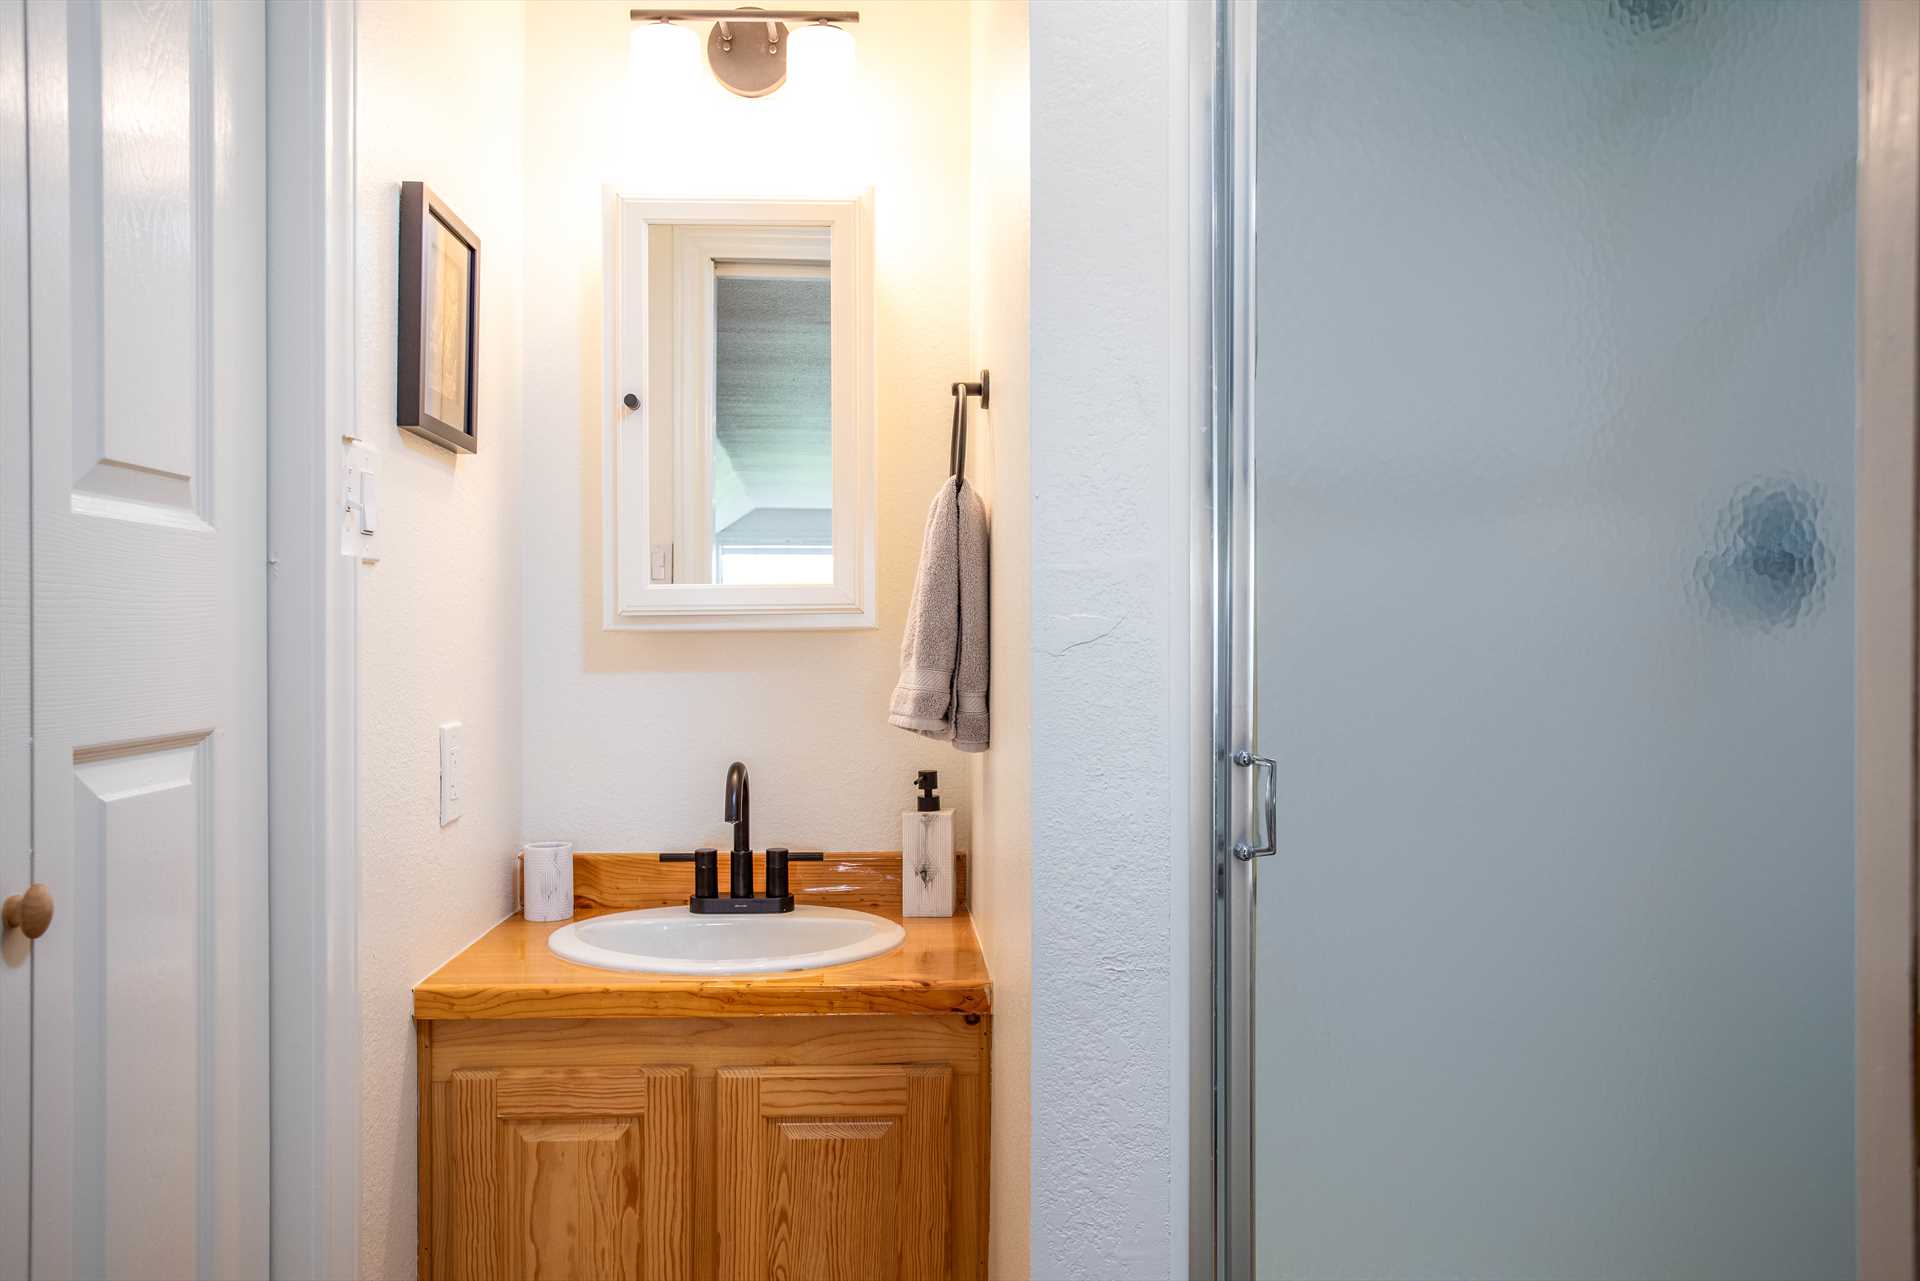                                                 The suite includes a full bath with a shower stall, and clean bath linens are also provided.